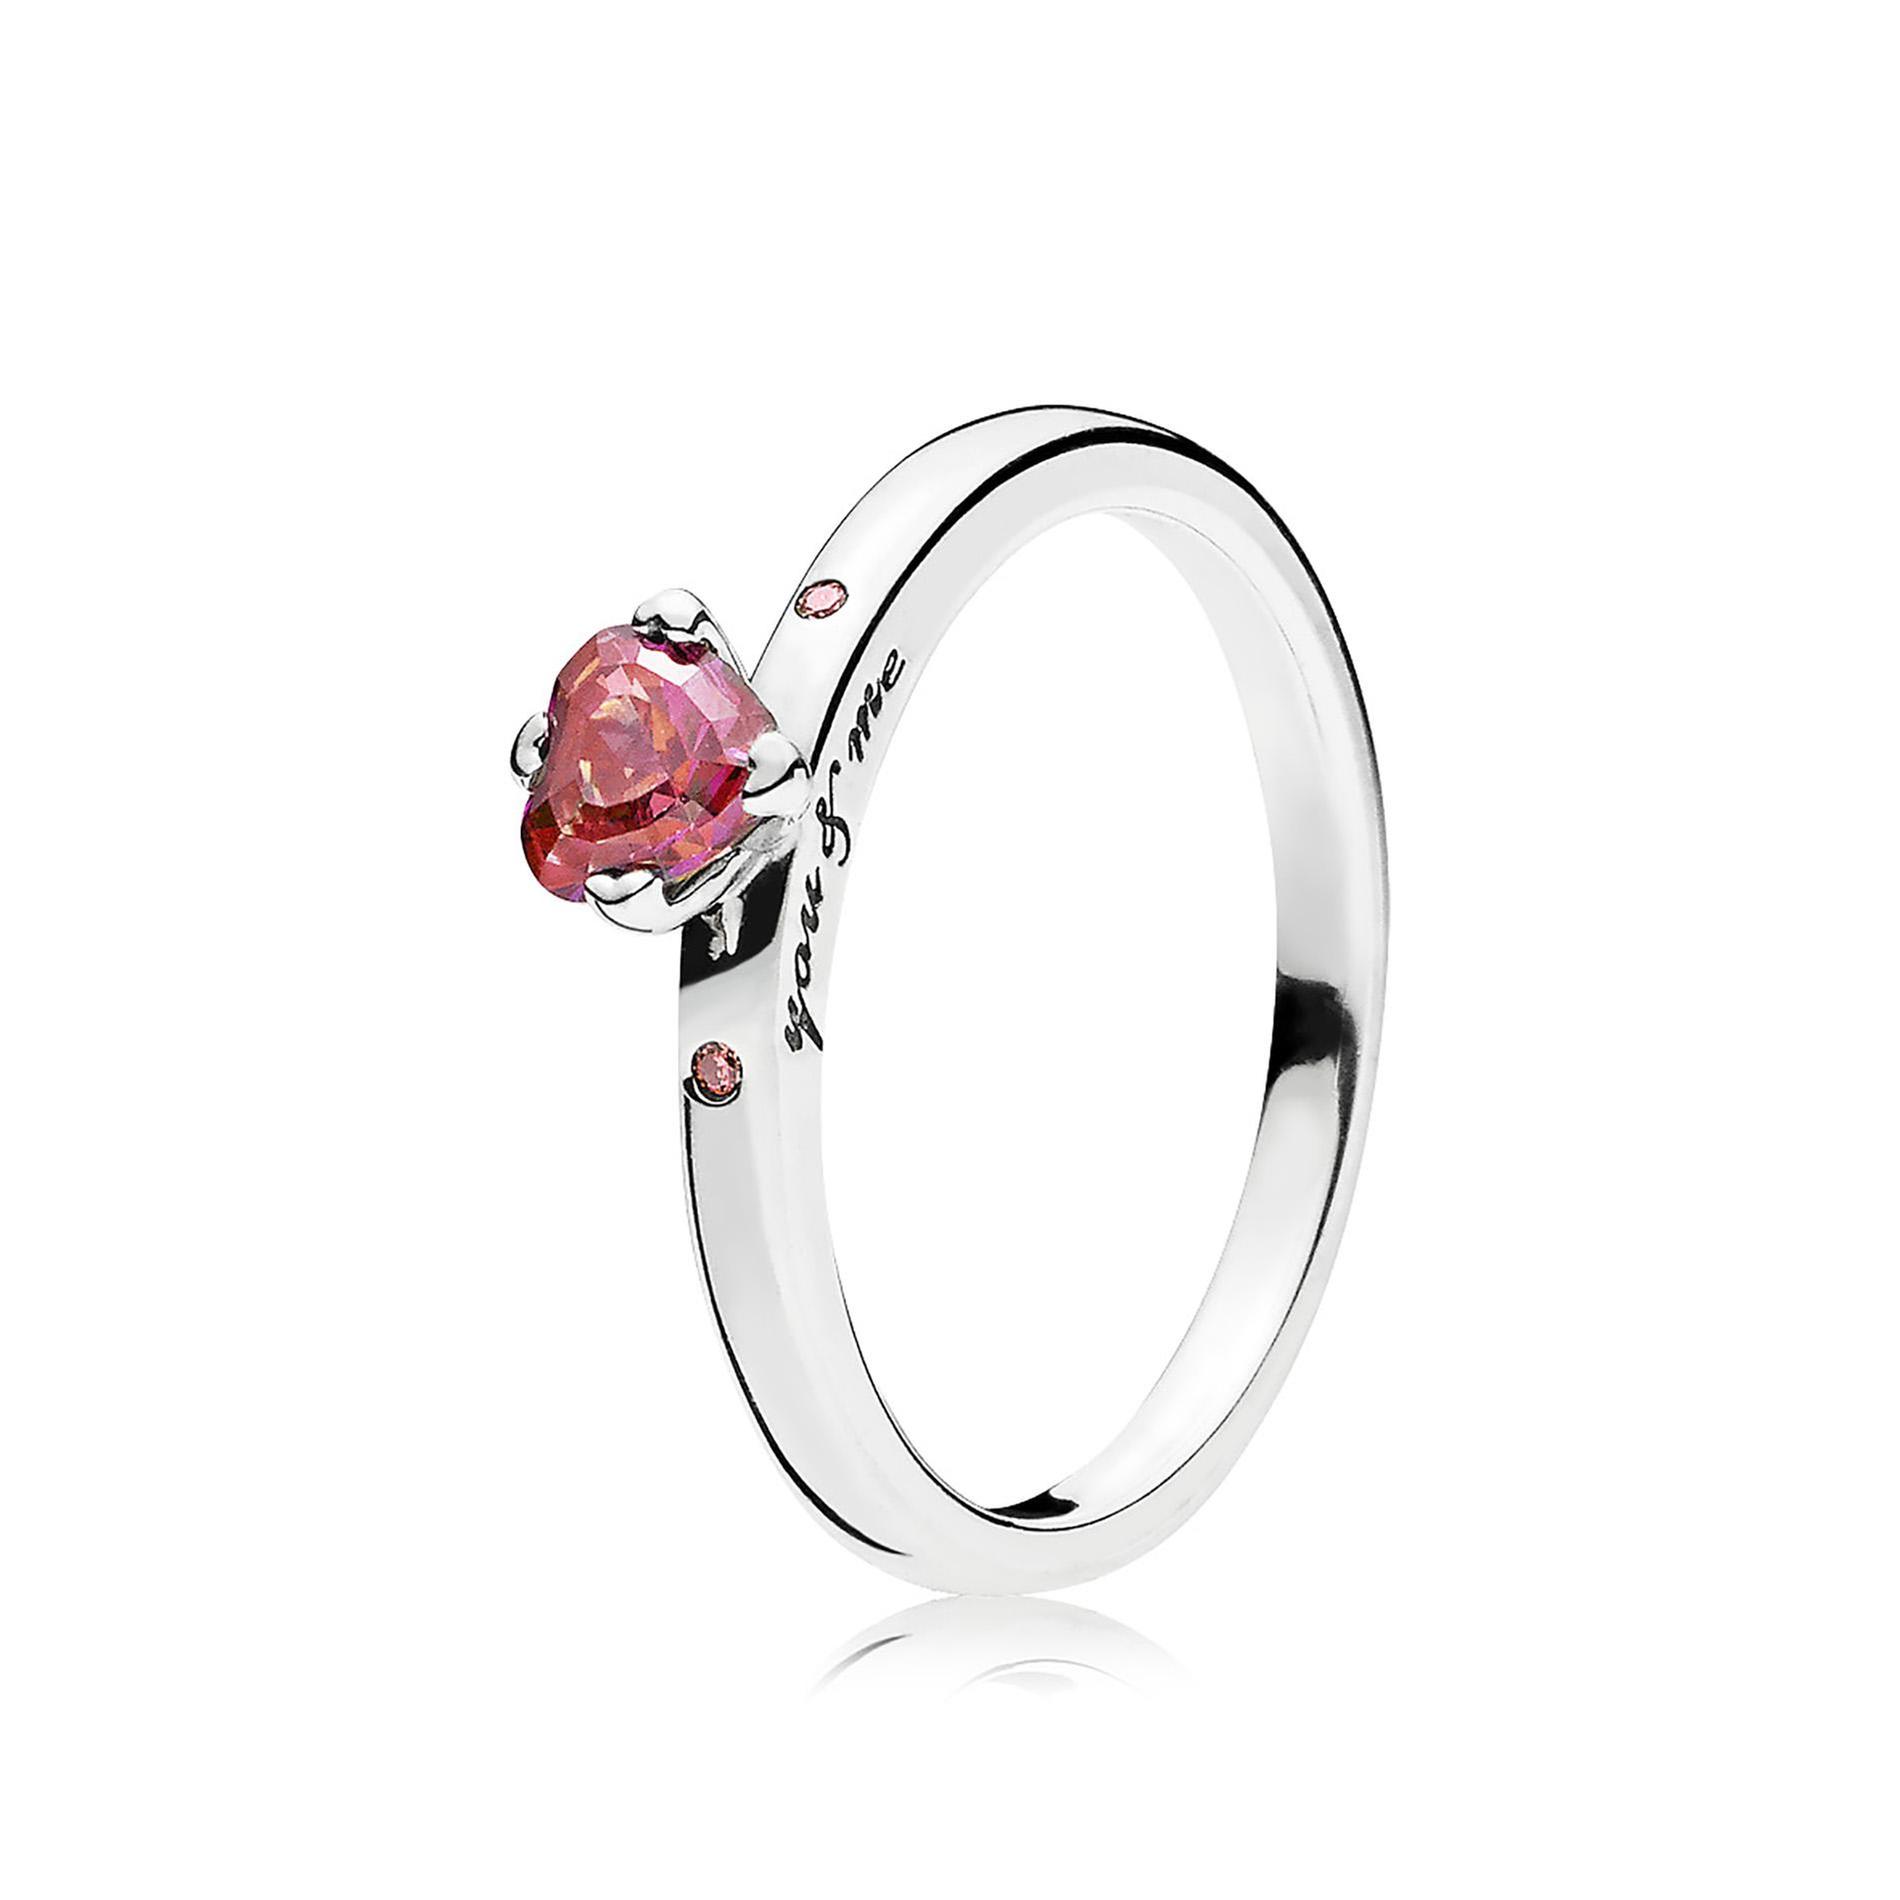 Pandora You & Me Ring, Multi-Colored Cubic Zirconia - Size 6